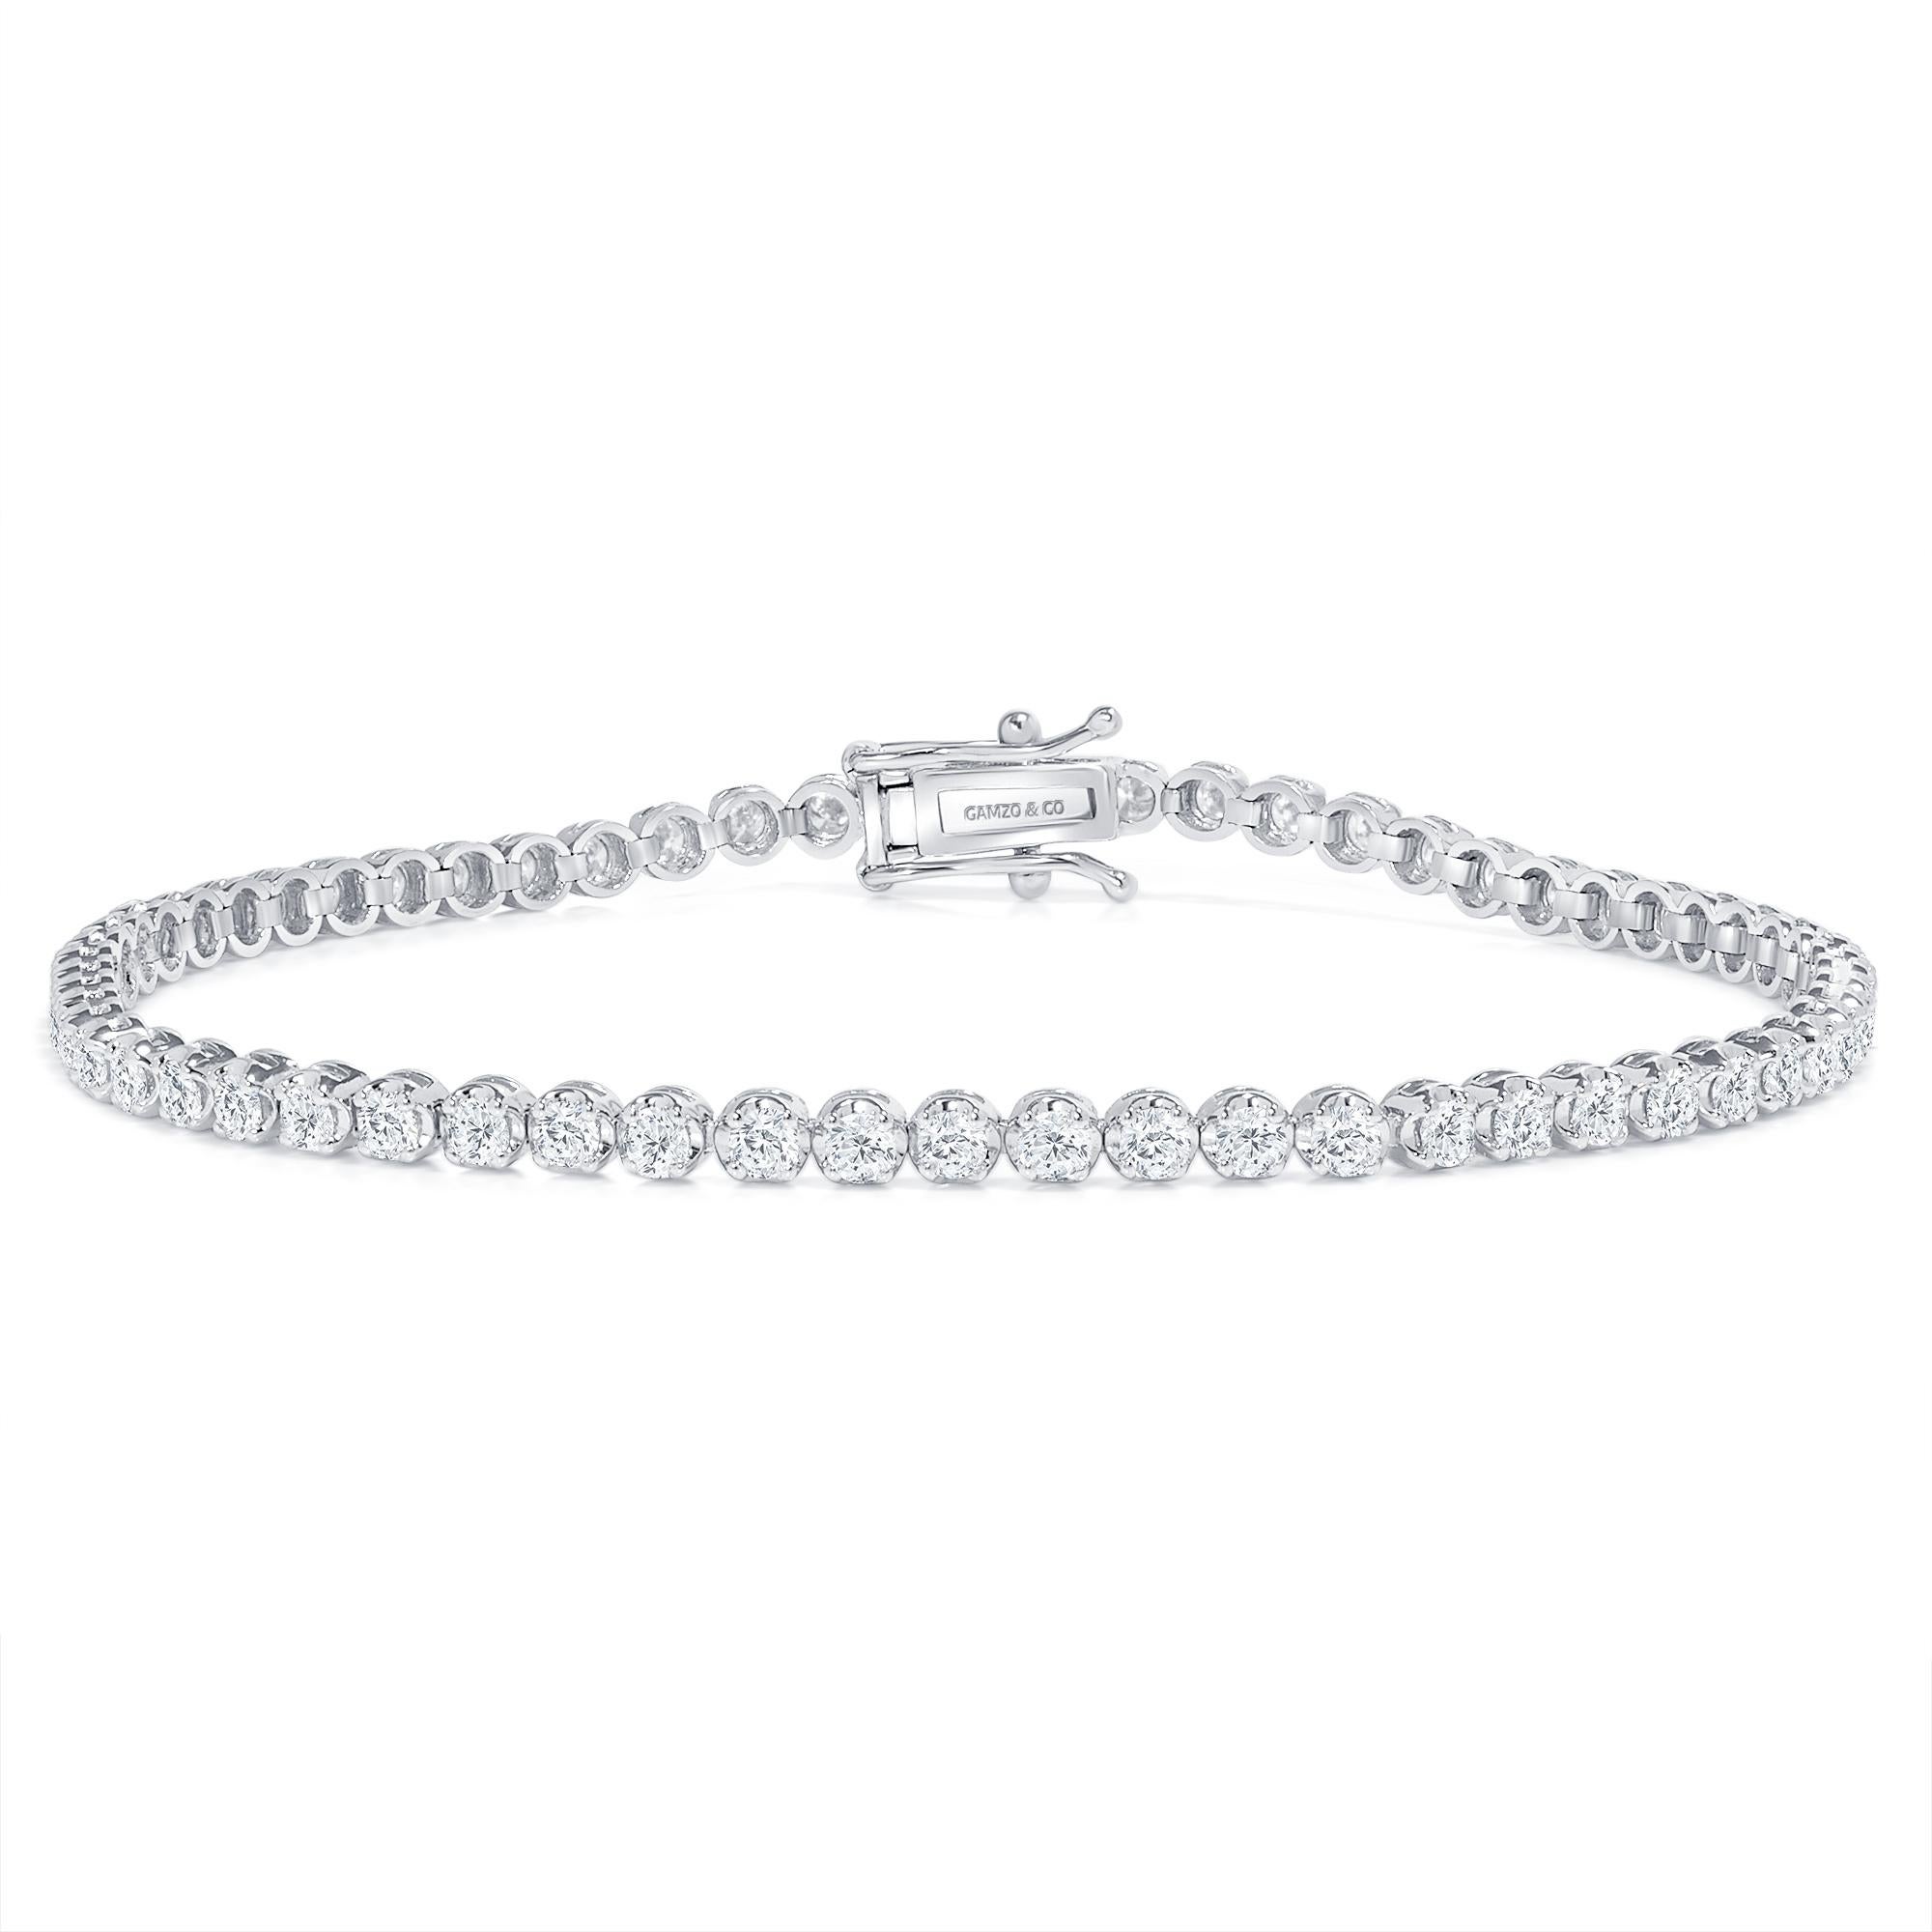 These beautiful round diamonds dance around your wrist as they absorb light and attention.
Metal: 14k Gold
Diamond Cut: Round
Diamond Total Carats: 3ct
Diamond Clarity: VS
Diamond Color: F
Color: White Gold
Bracelet Length: 5.5 Inches 
Included with